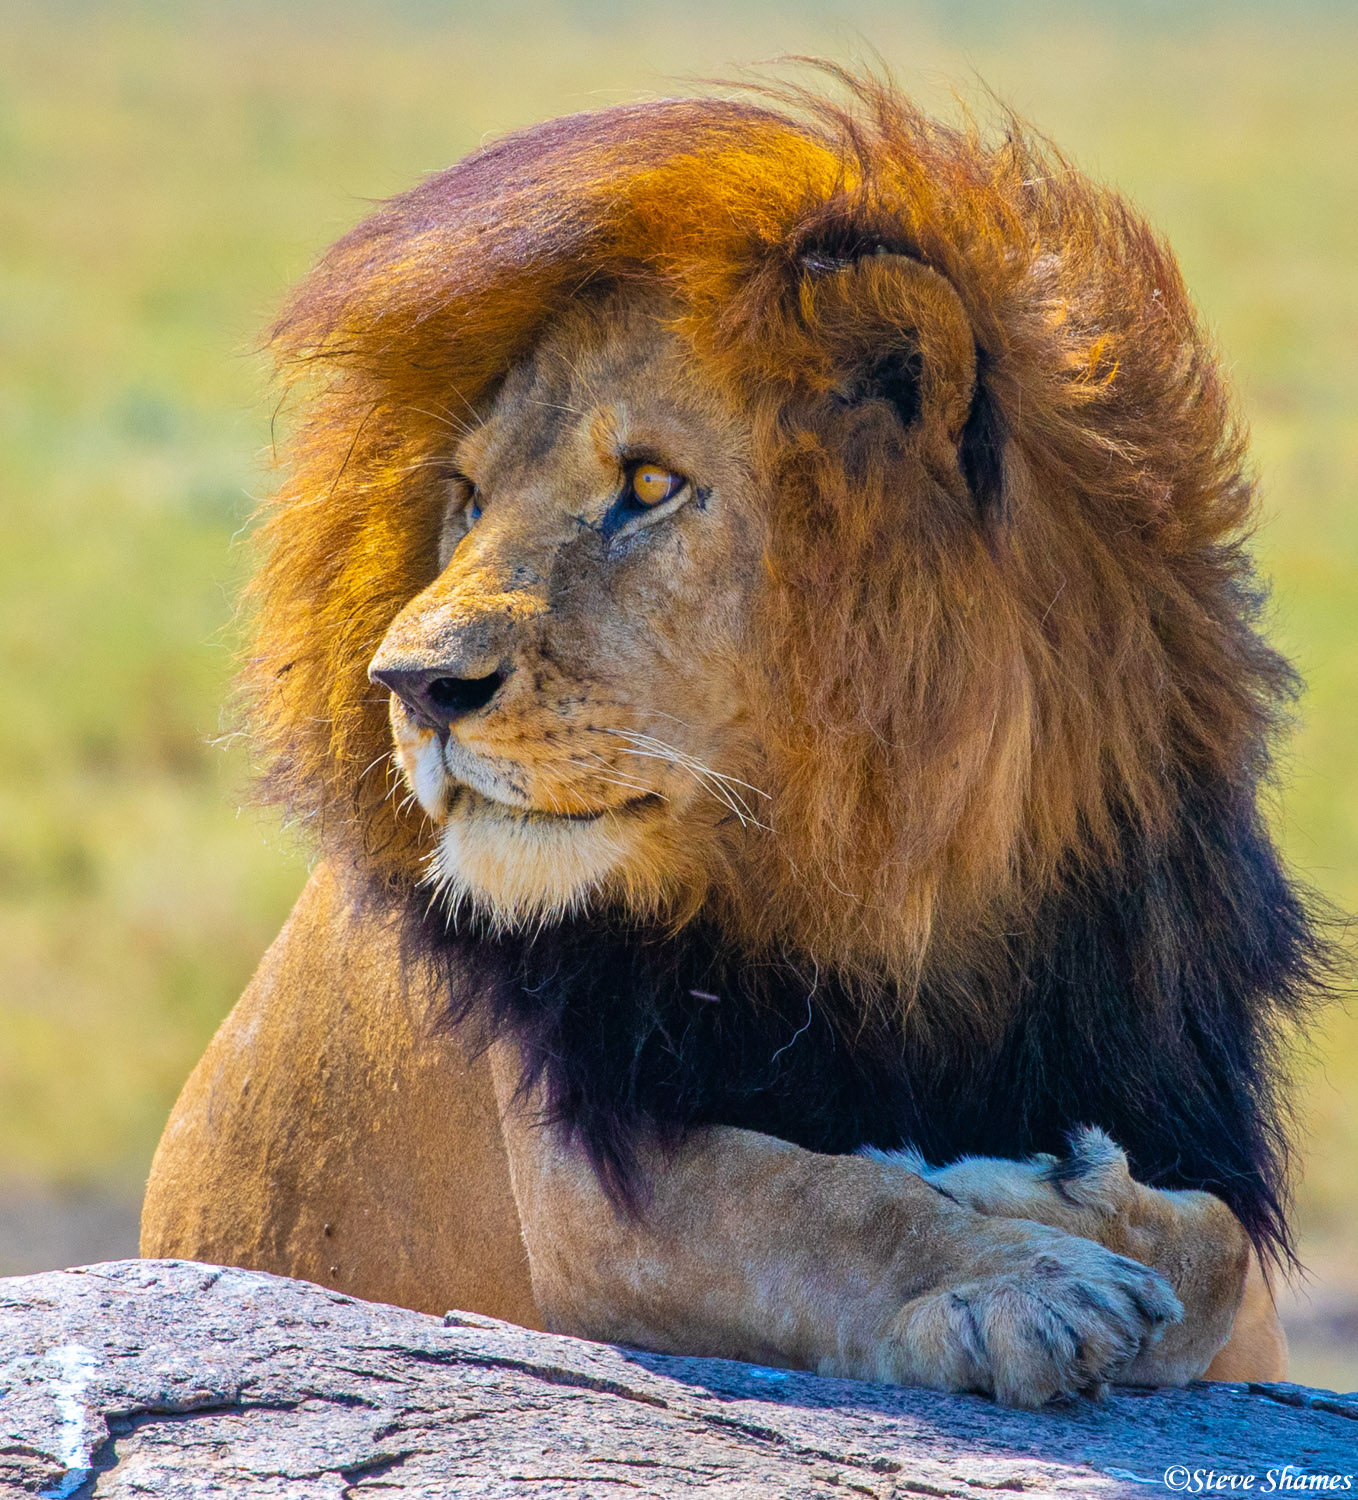 A side view portrait of an African lion.